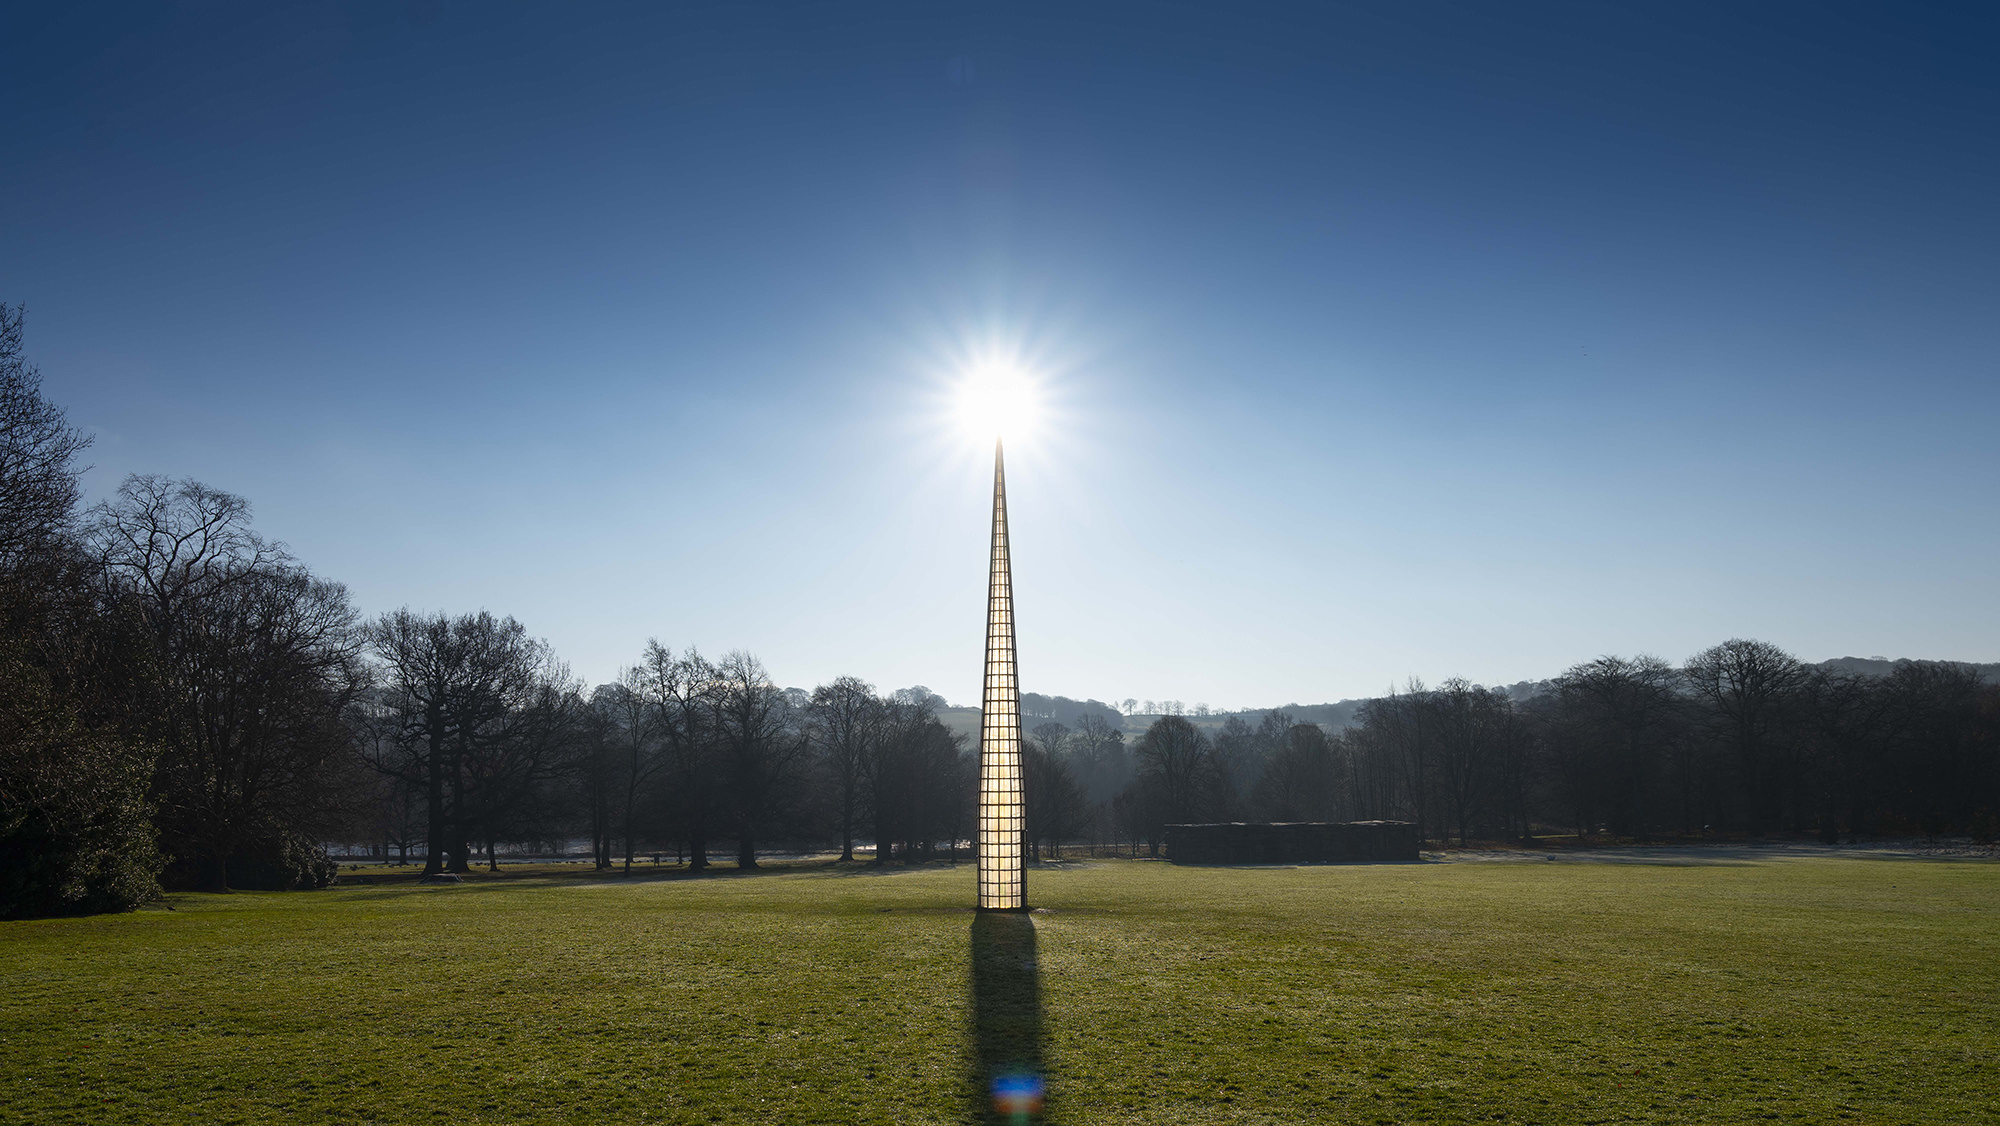 A tall pointed tower, with glass panels. The sun is rising behind it.